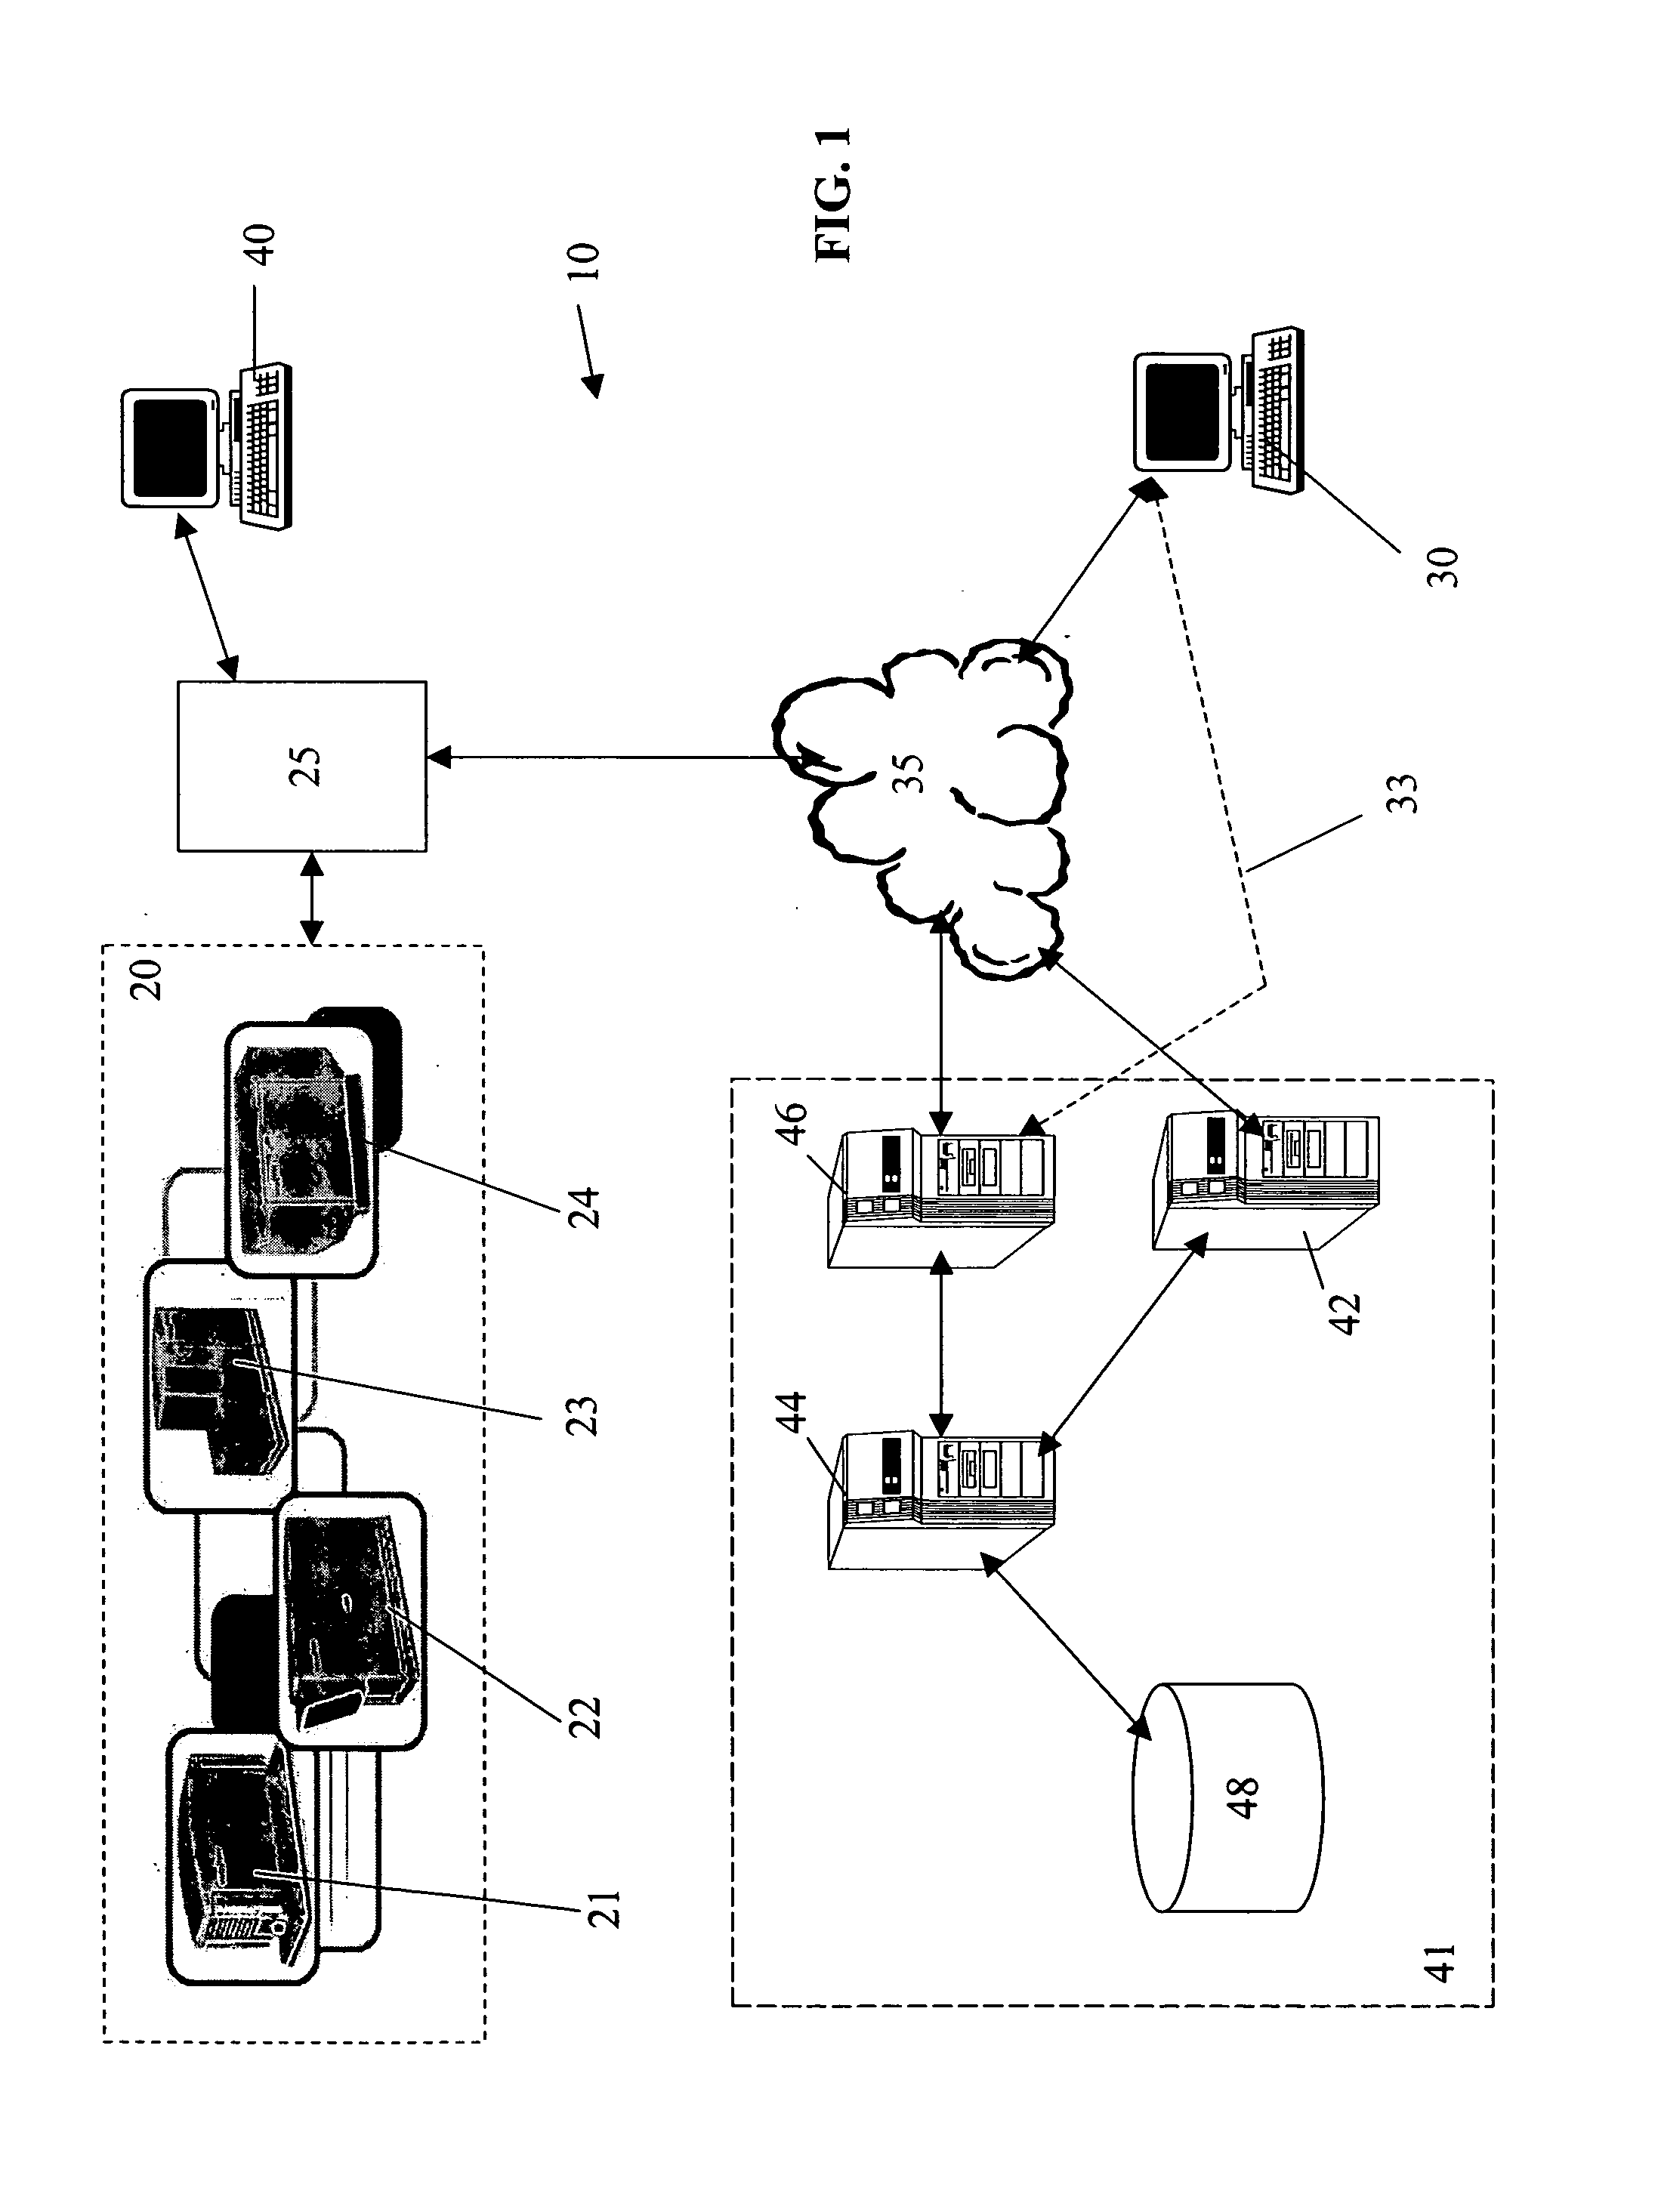 System and method for managing energy generation equipment